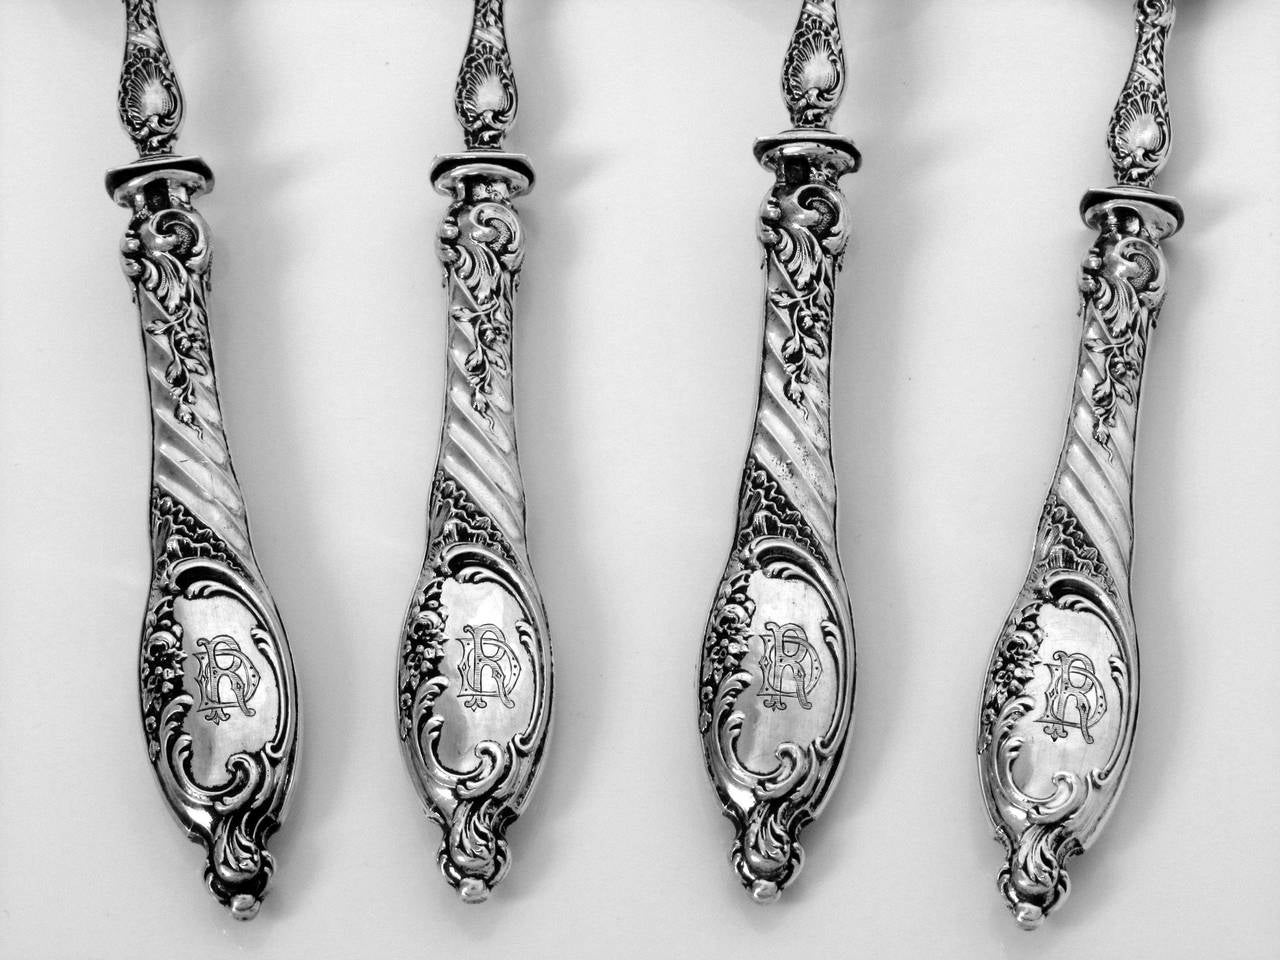 Puiforcat French All Sterling Silver Dessert Hors d'Oeuvre Set 4 pc Rococo For Sale 2